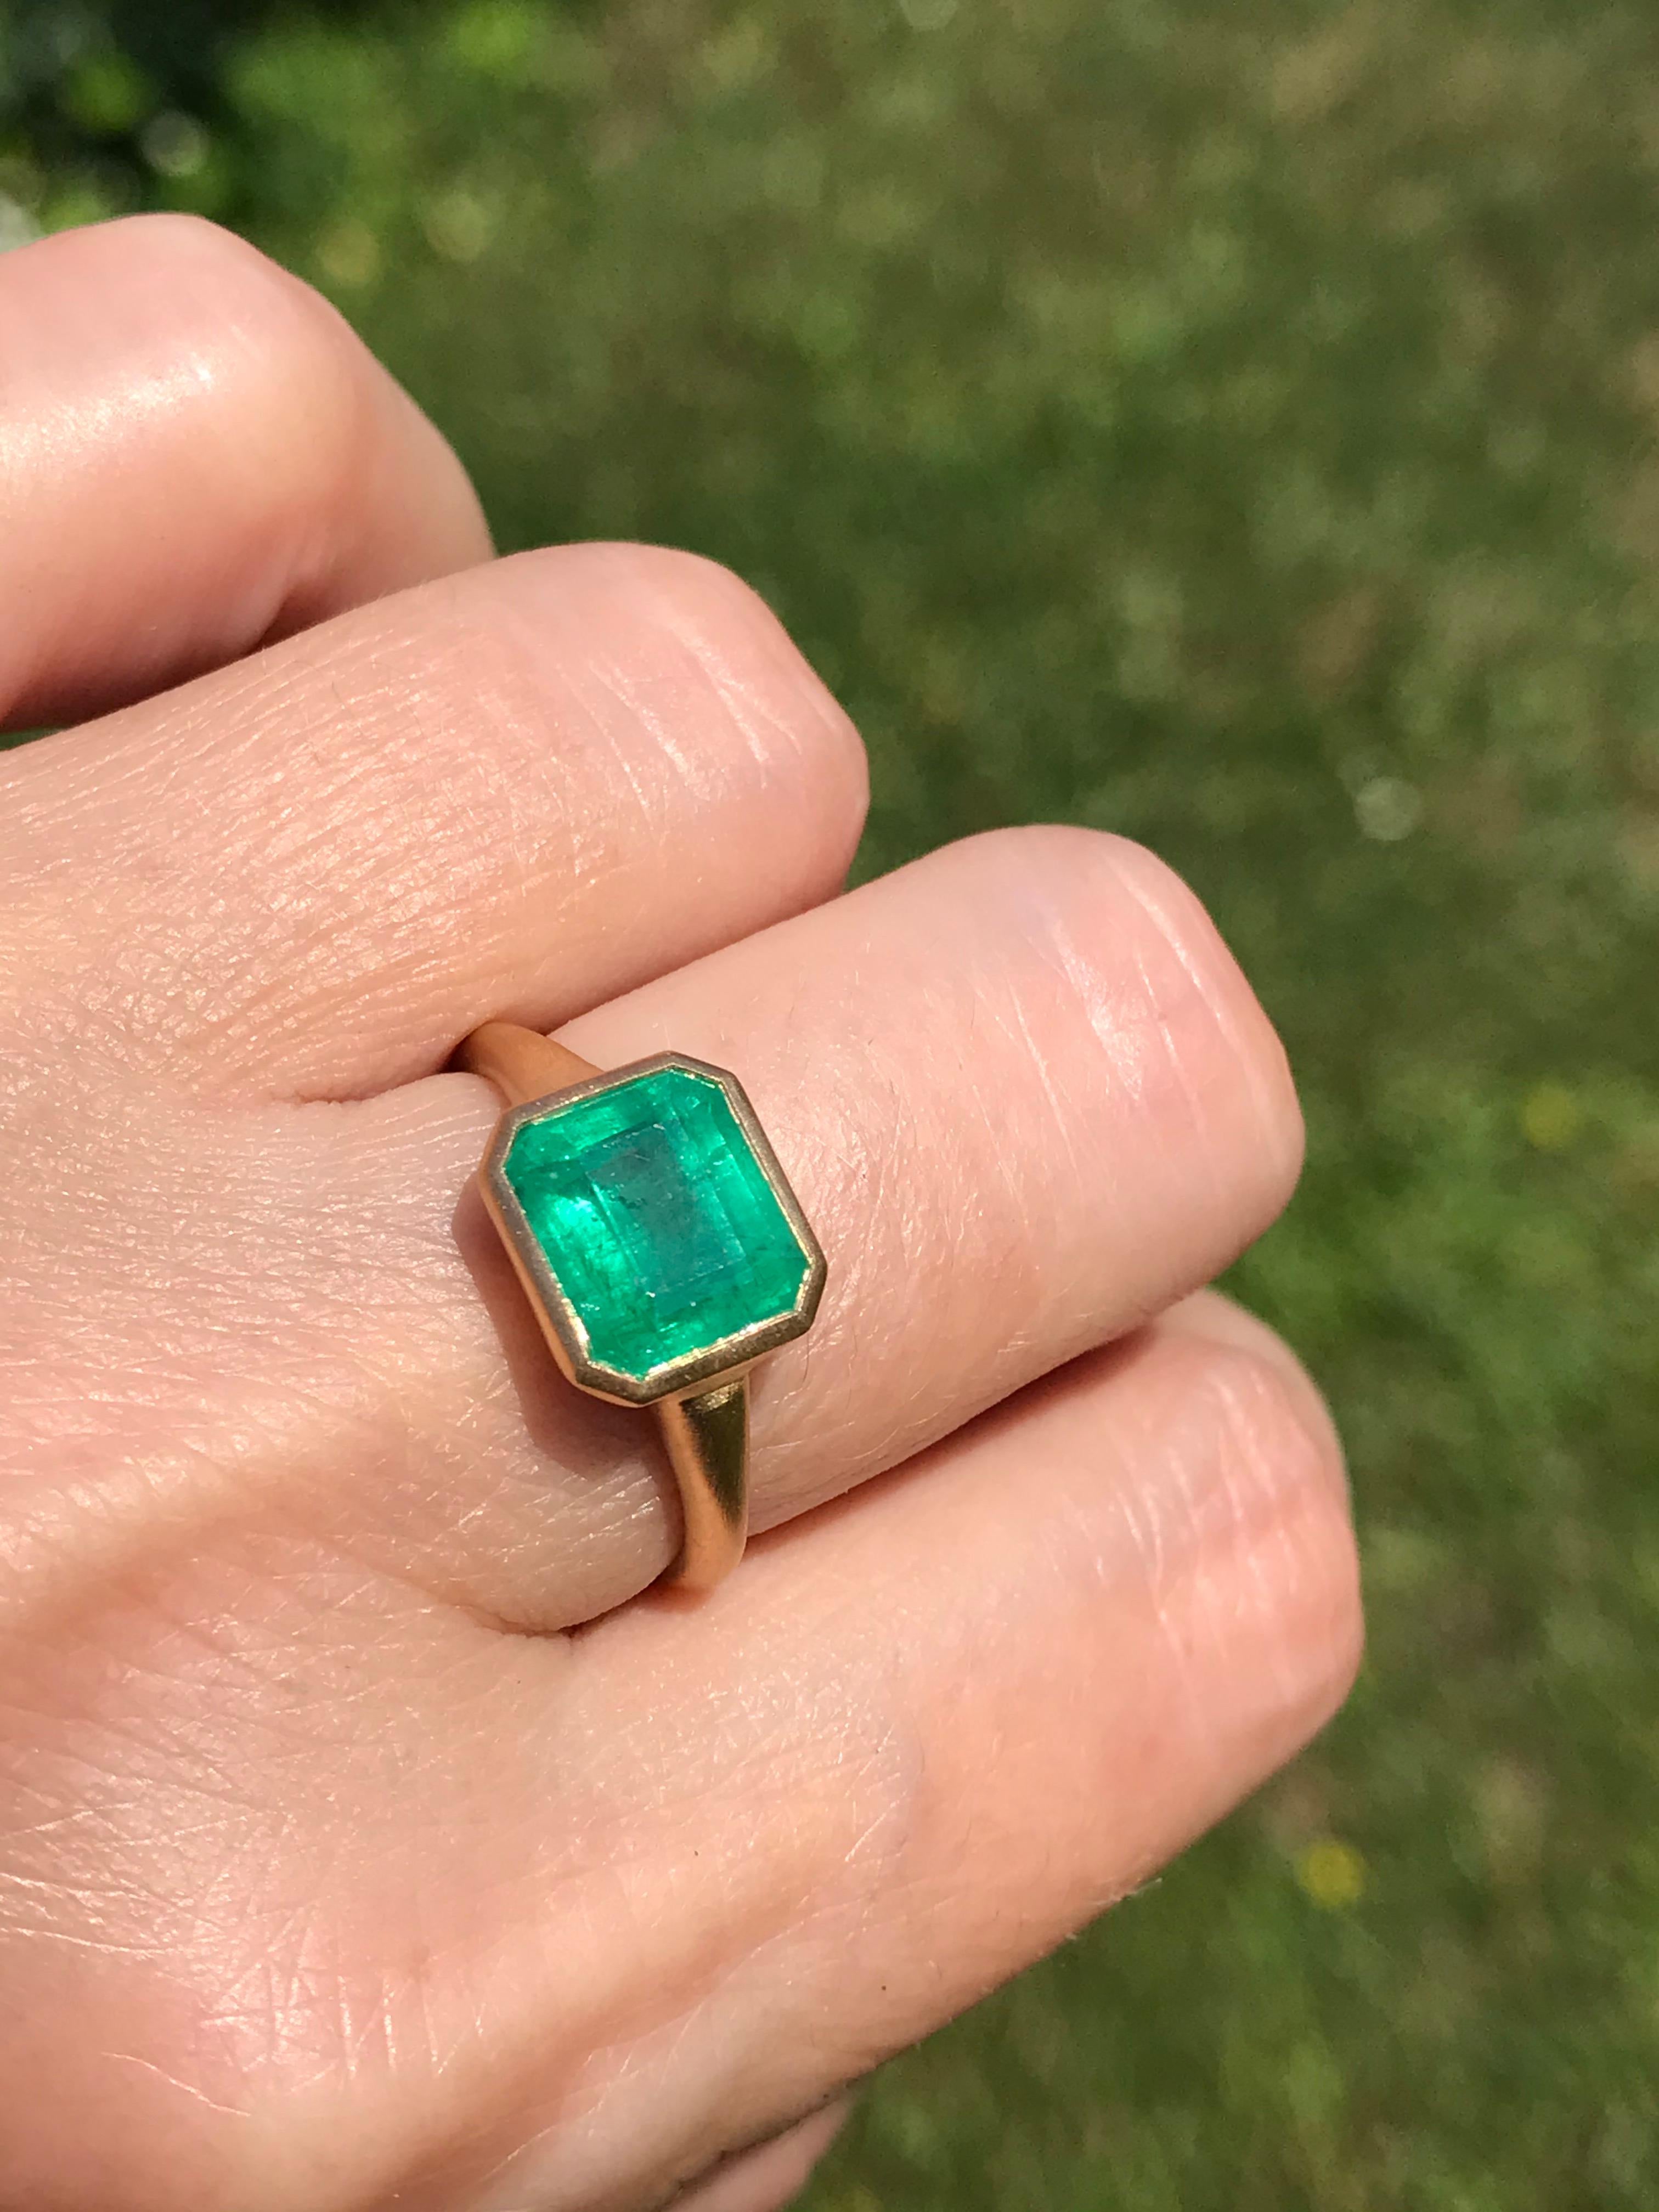 Dalben design One of a Kind 18k yellow gold matte finishing ring with a 3,86 carat bezel-set emerald cut emerald. 
Ring size 7 1/4 USA - EU 55 re-sizable to most finger sizes. 
Bezel stone dimensions :
width 10,6 mm
height 9,1 mm
The ring has been